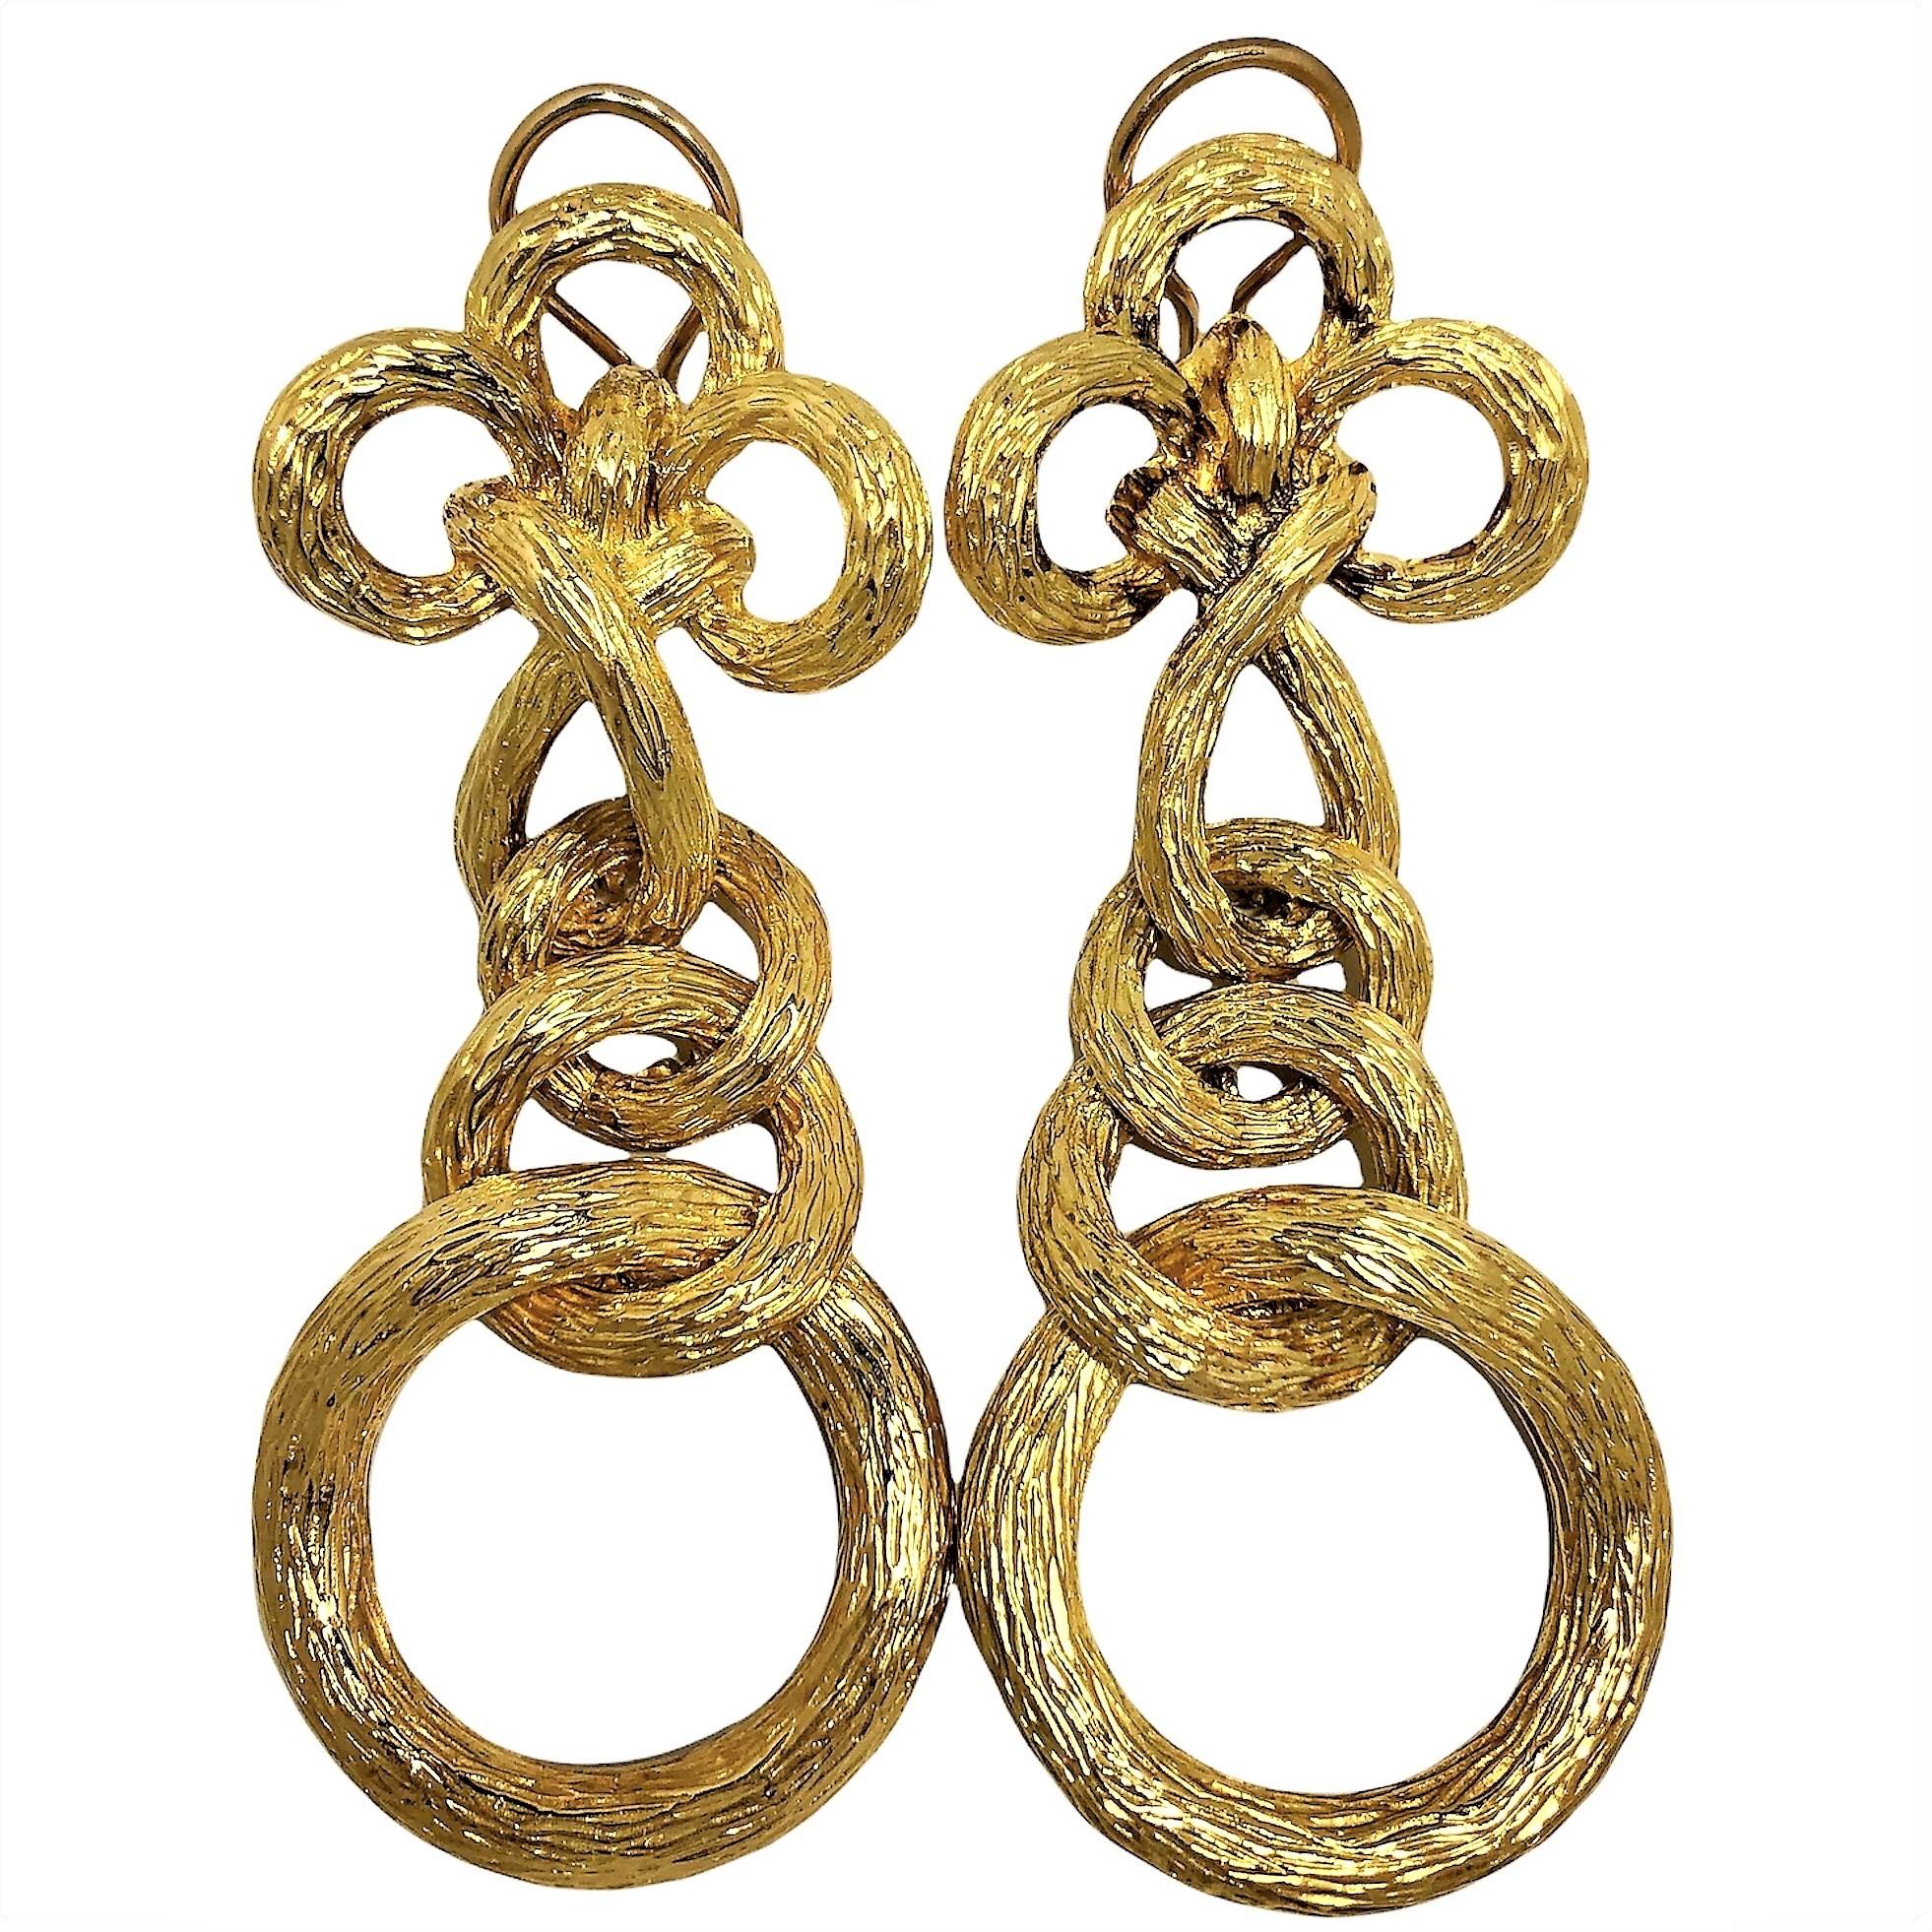 This wonderfully articulated and crafted pair of earrings has movement throughout, with each individual section hinged to the next. The entire surface is hand finished in what is referred to  as 